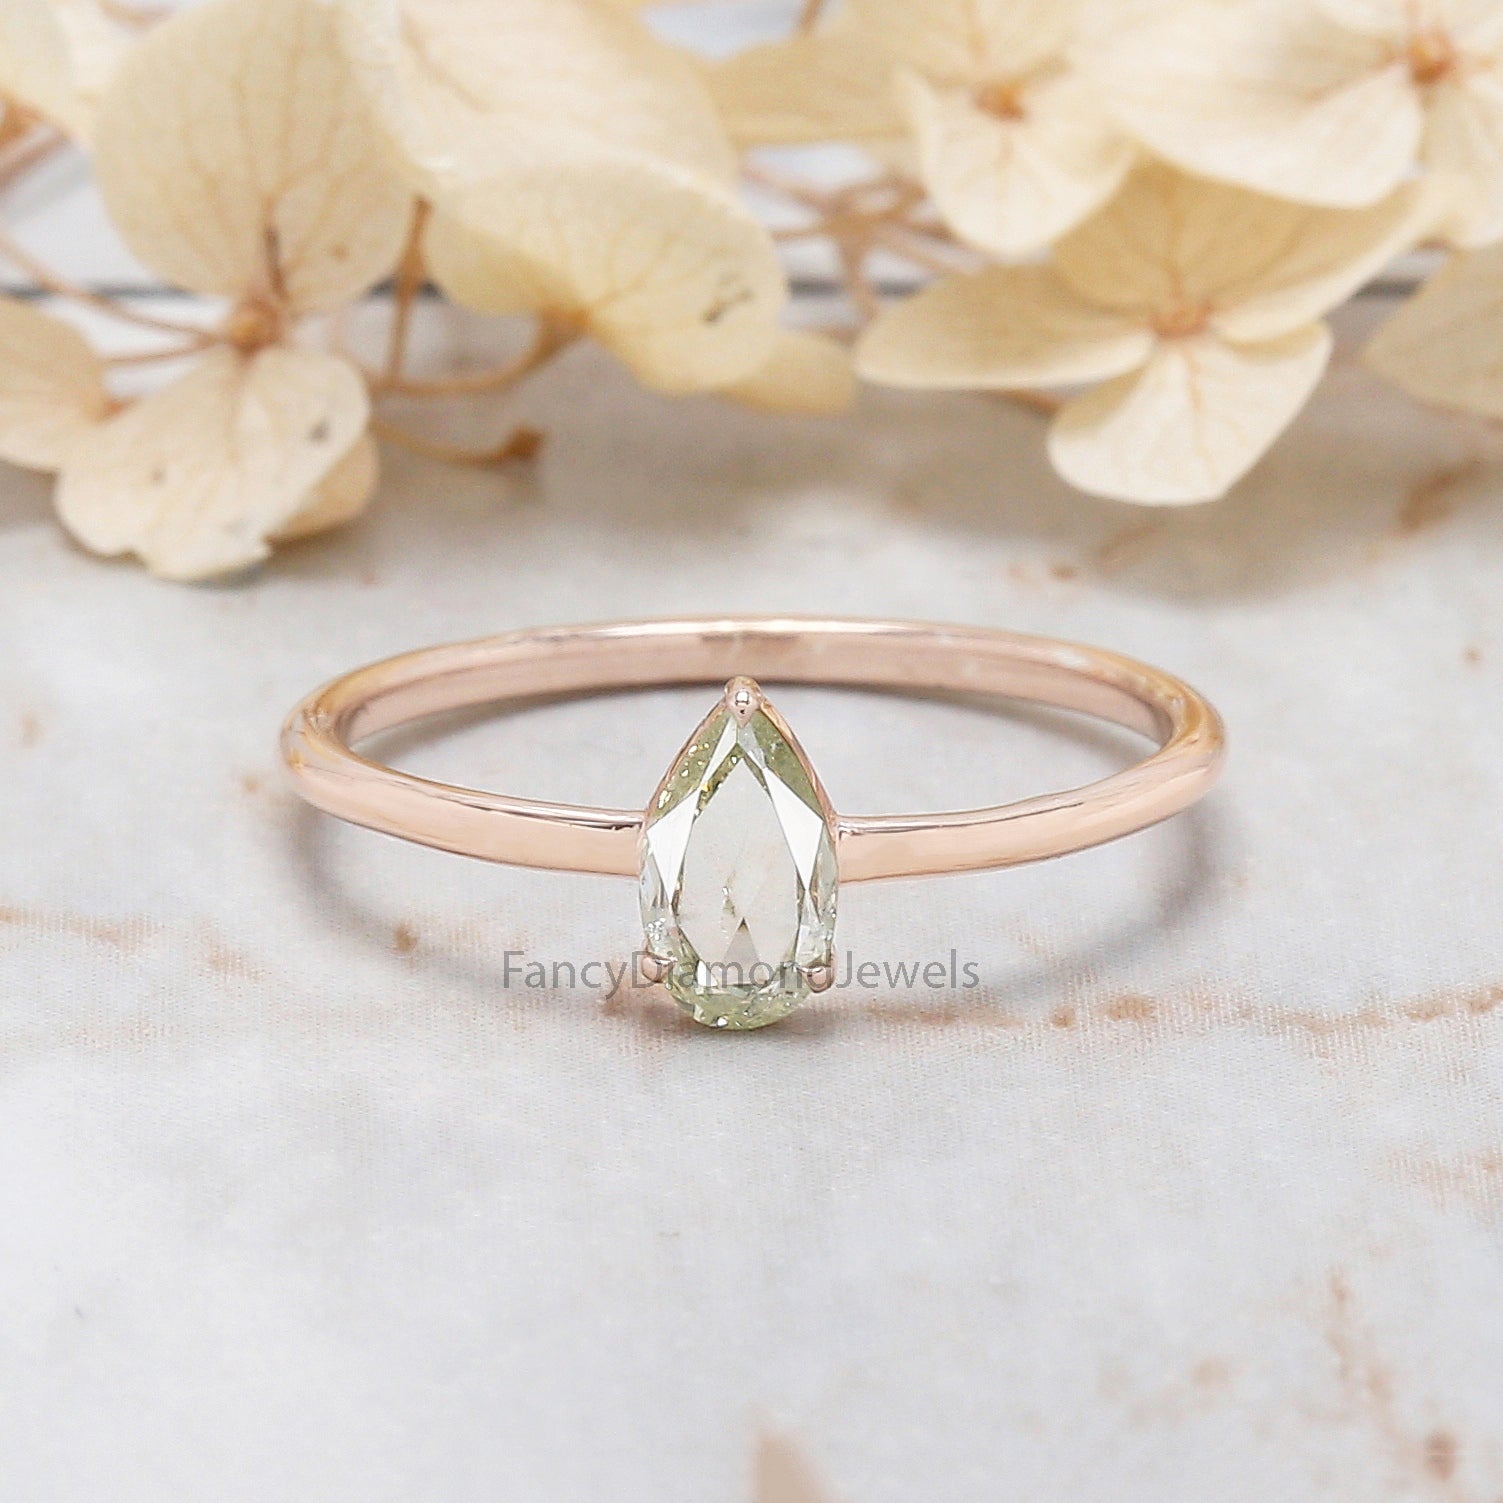 GIA Certified Pear Green Color Diamond Ring 0.32 Ct 6.63 MM Pear Diamond Ring 14K Solid Rose Gold Silver Engagement Ring Gift For Her QL4429